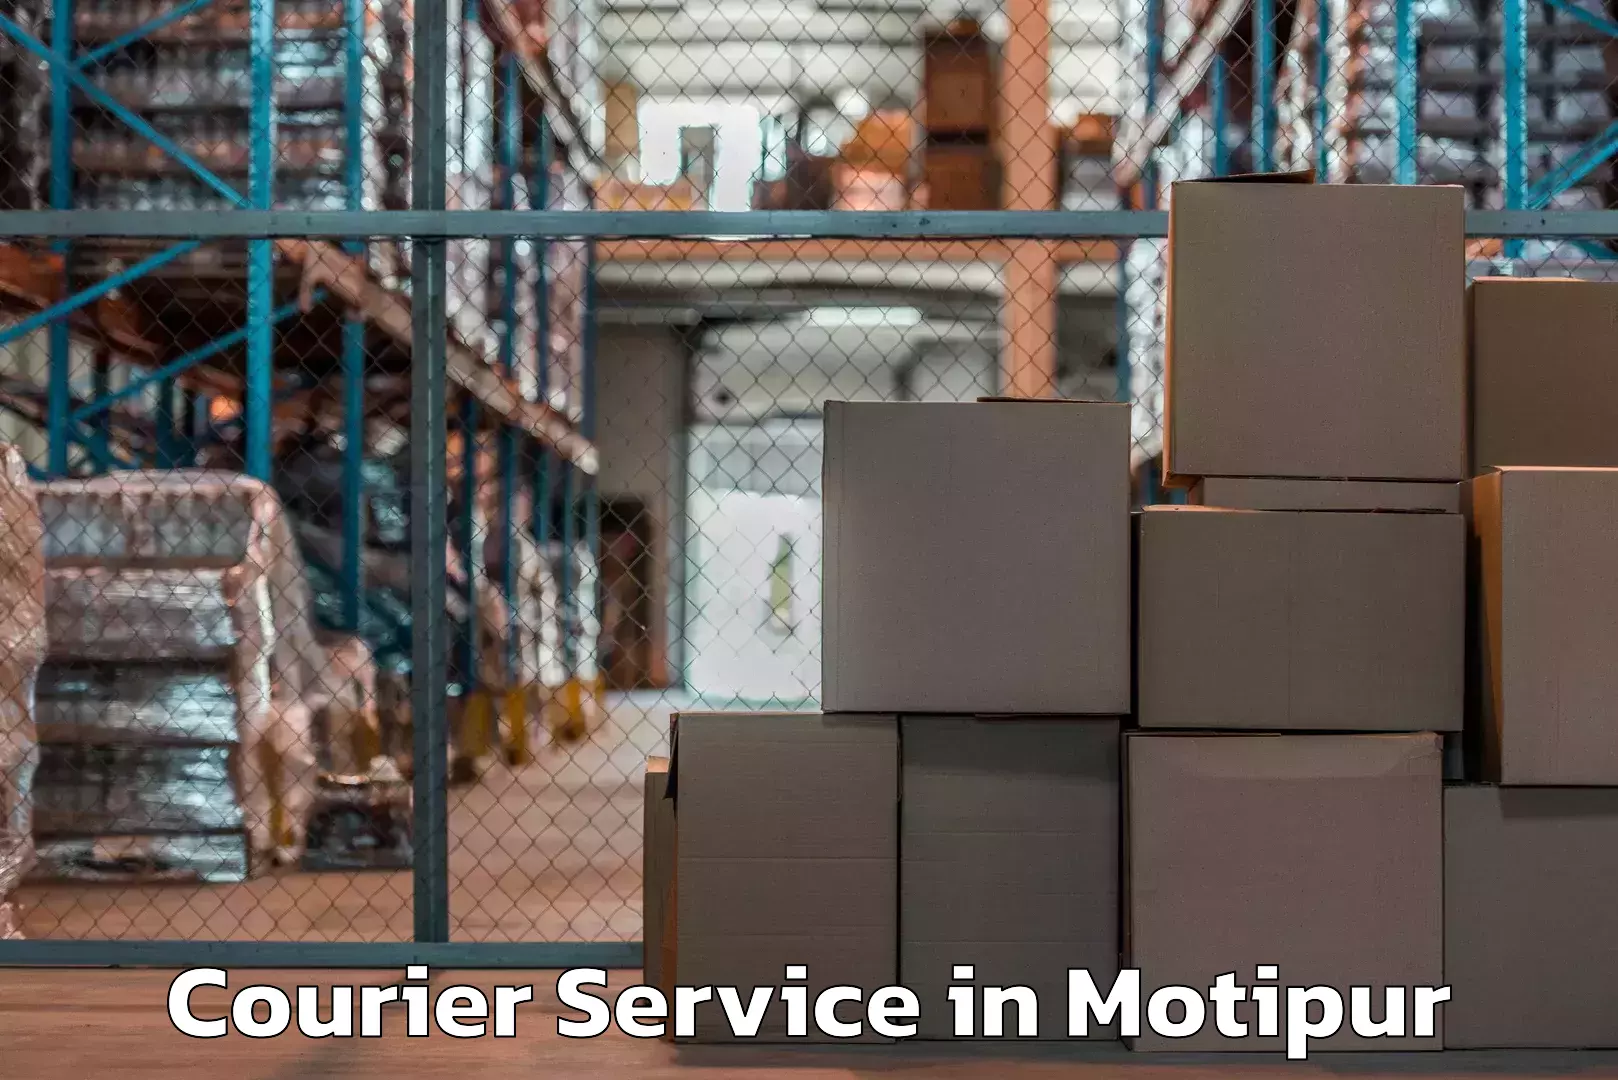 Urban courier service in Motipur